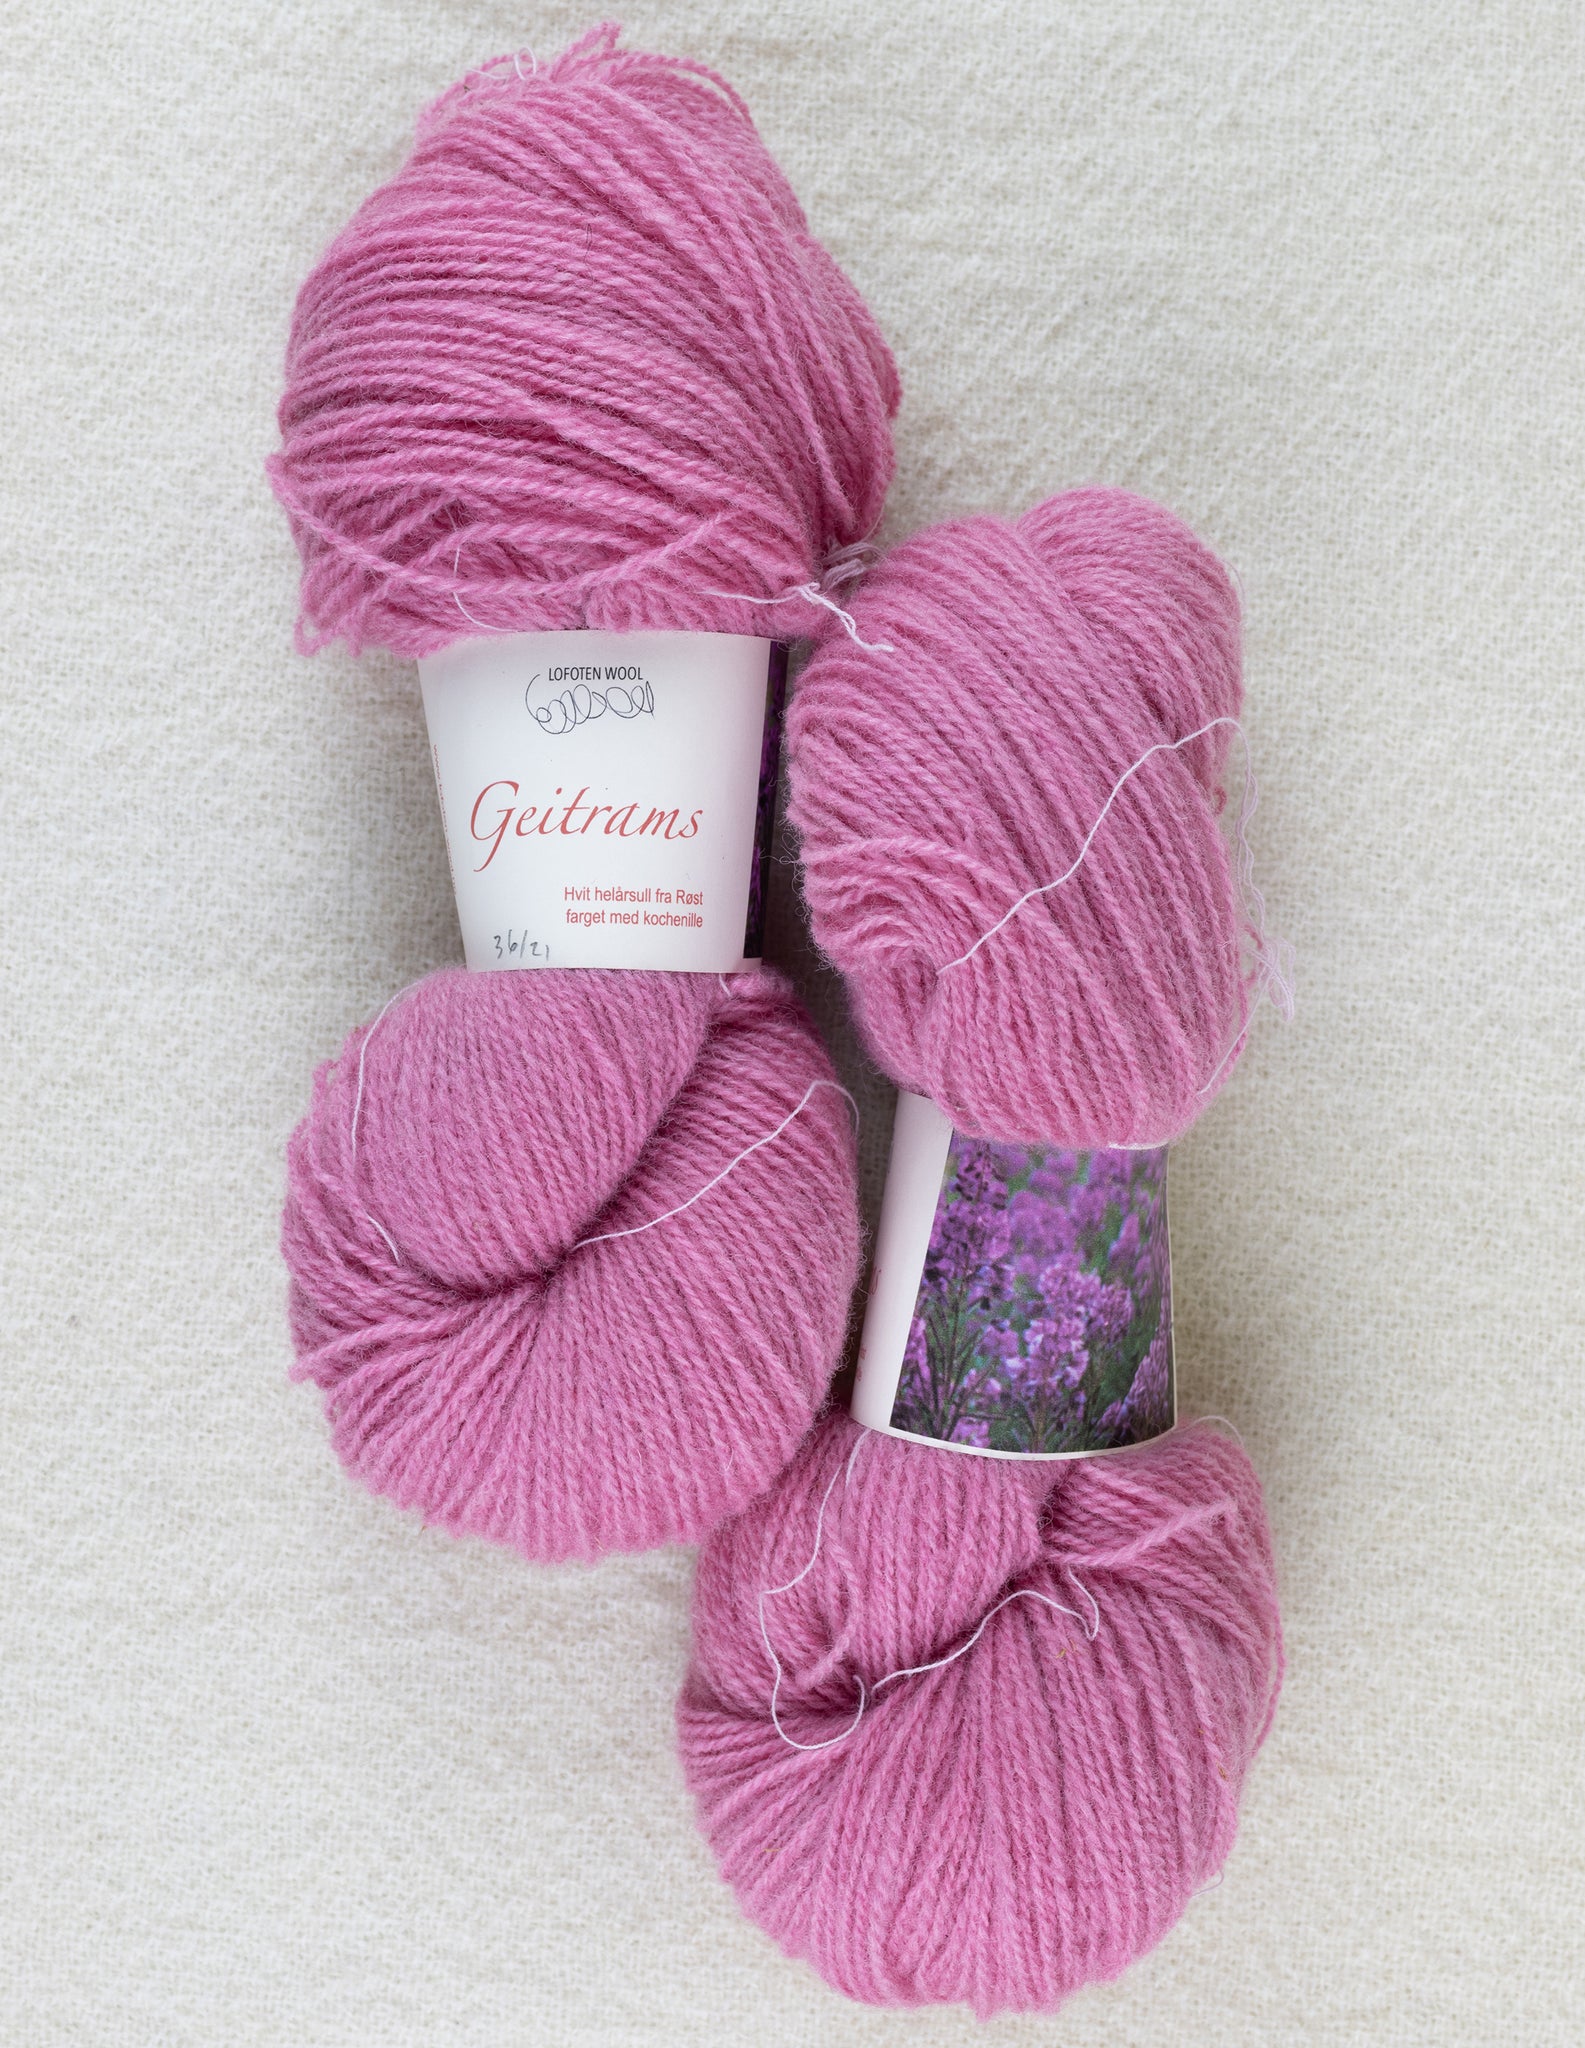 Geitrams 2 ply, 50/100g, (Fireweed)